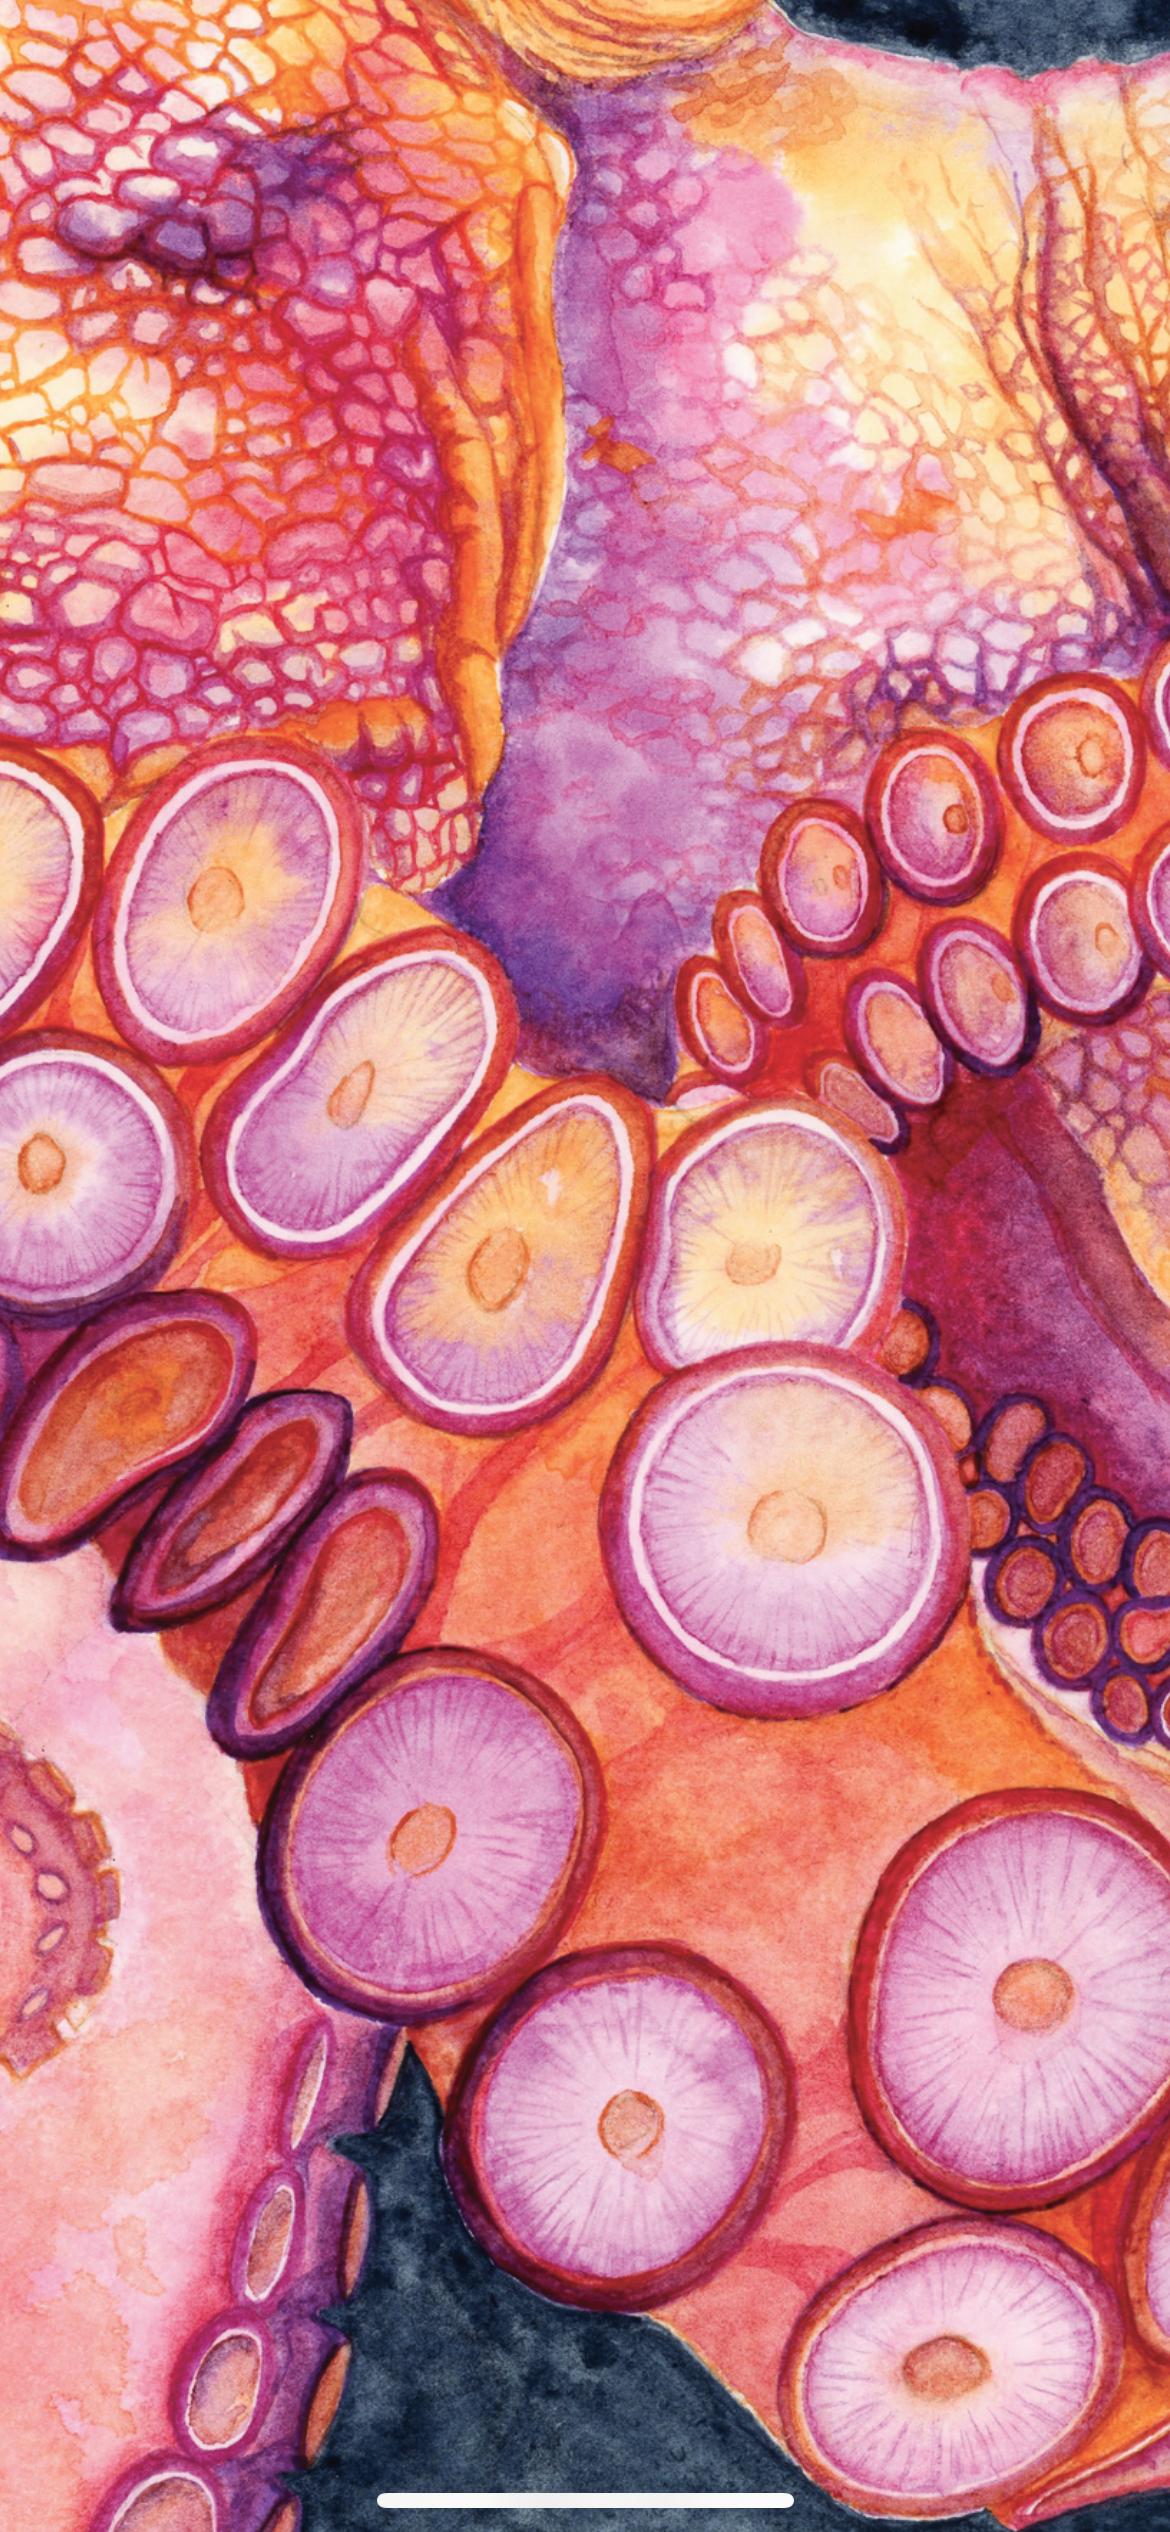 Giant Pacific Octopus Original Watercolor Painting